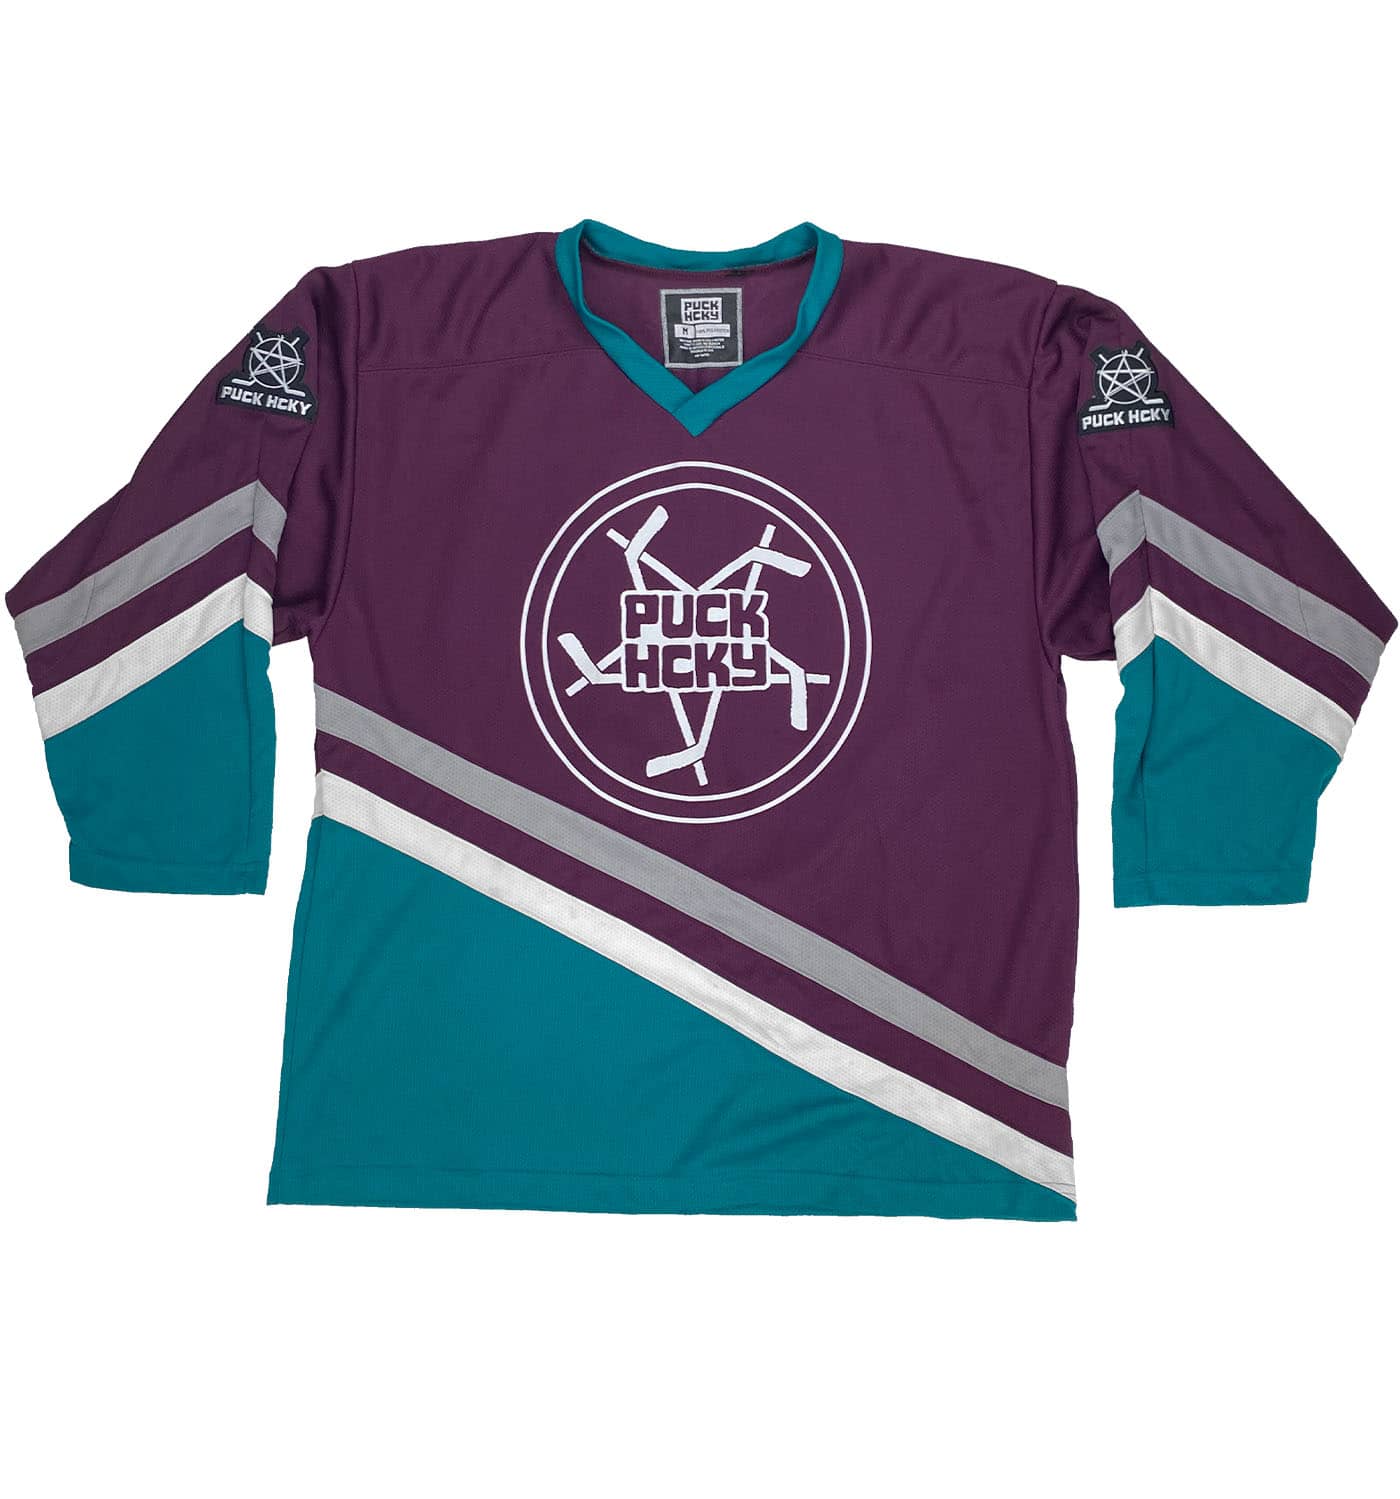 PANTERA 'A NEW LEVEL' DELUXE HOCKEY JERSEY – PUCK HCKY